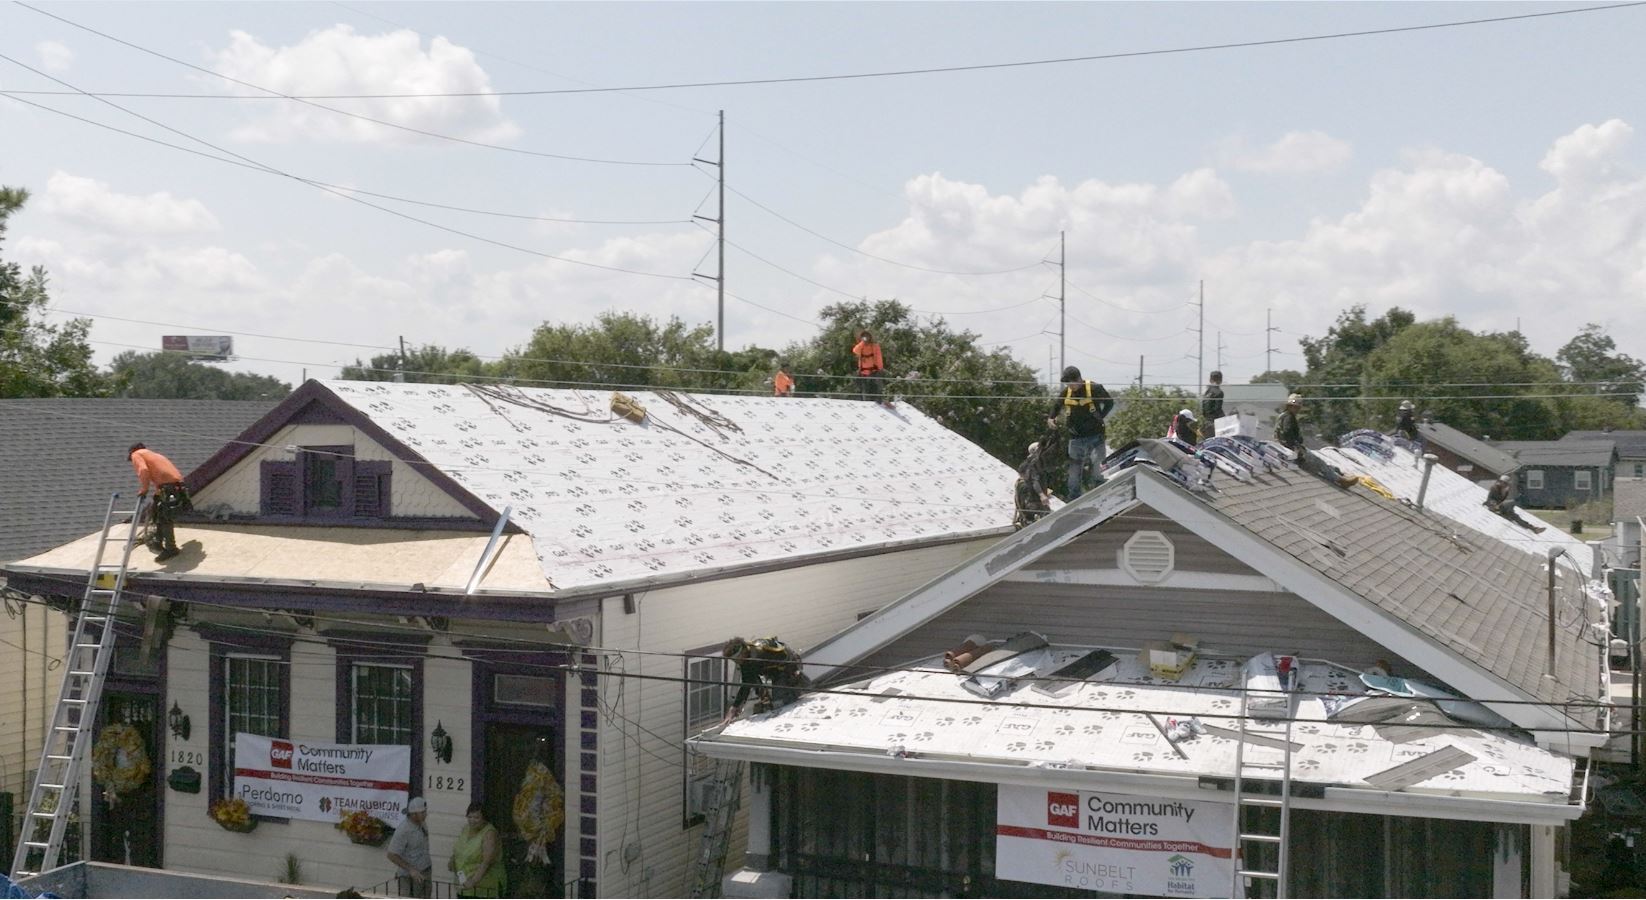 A roofer on working on a tarp-covered roof